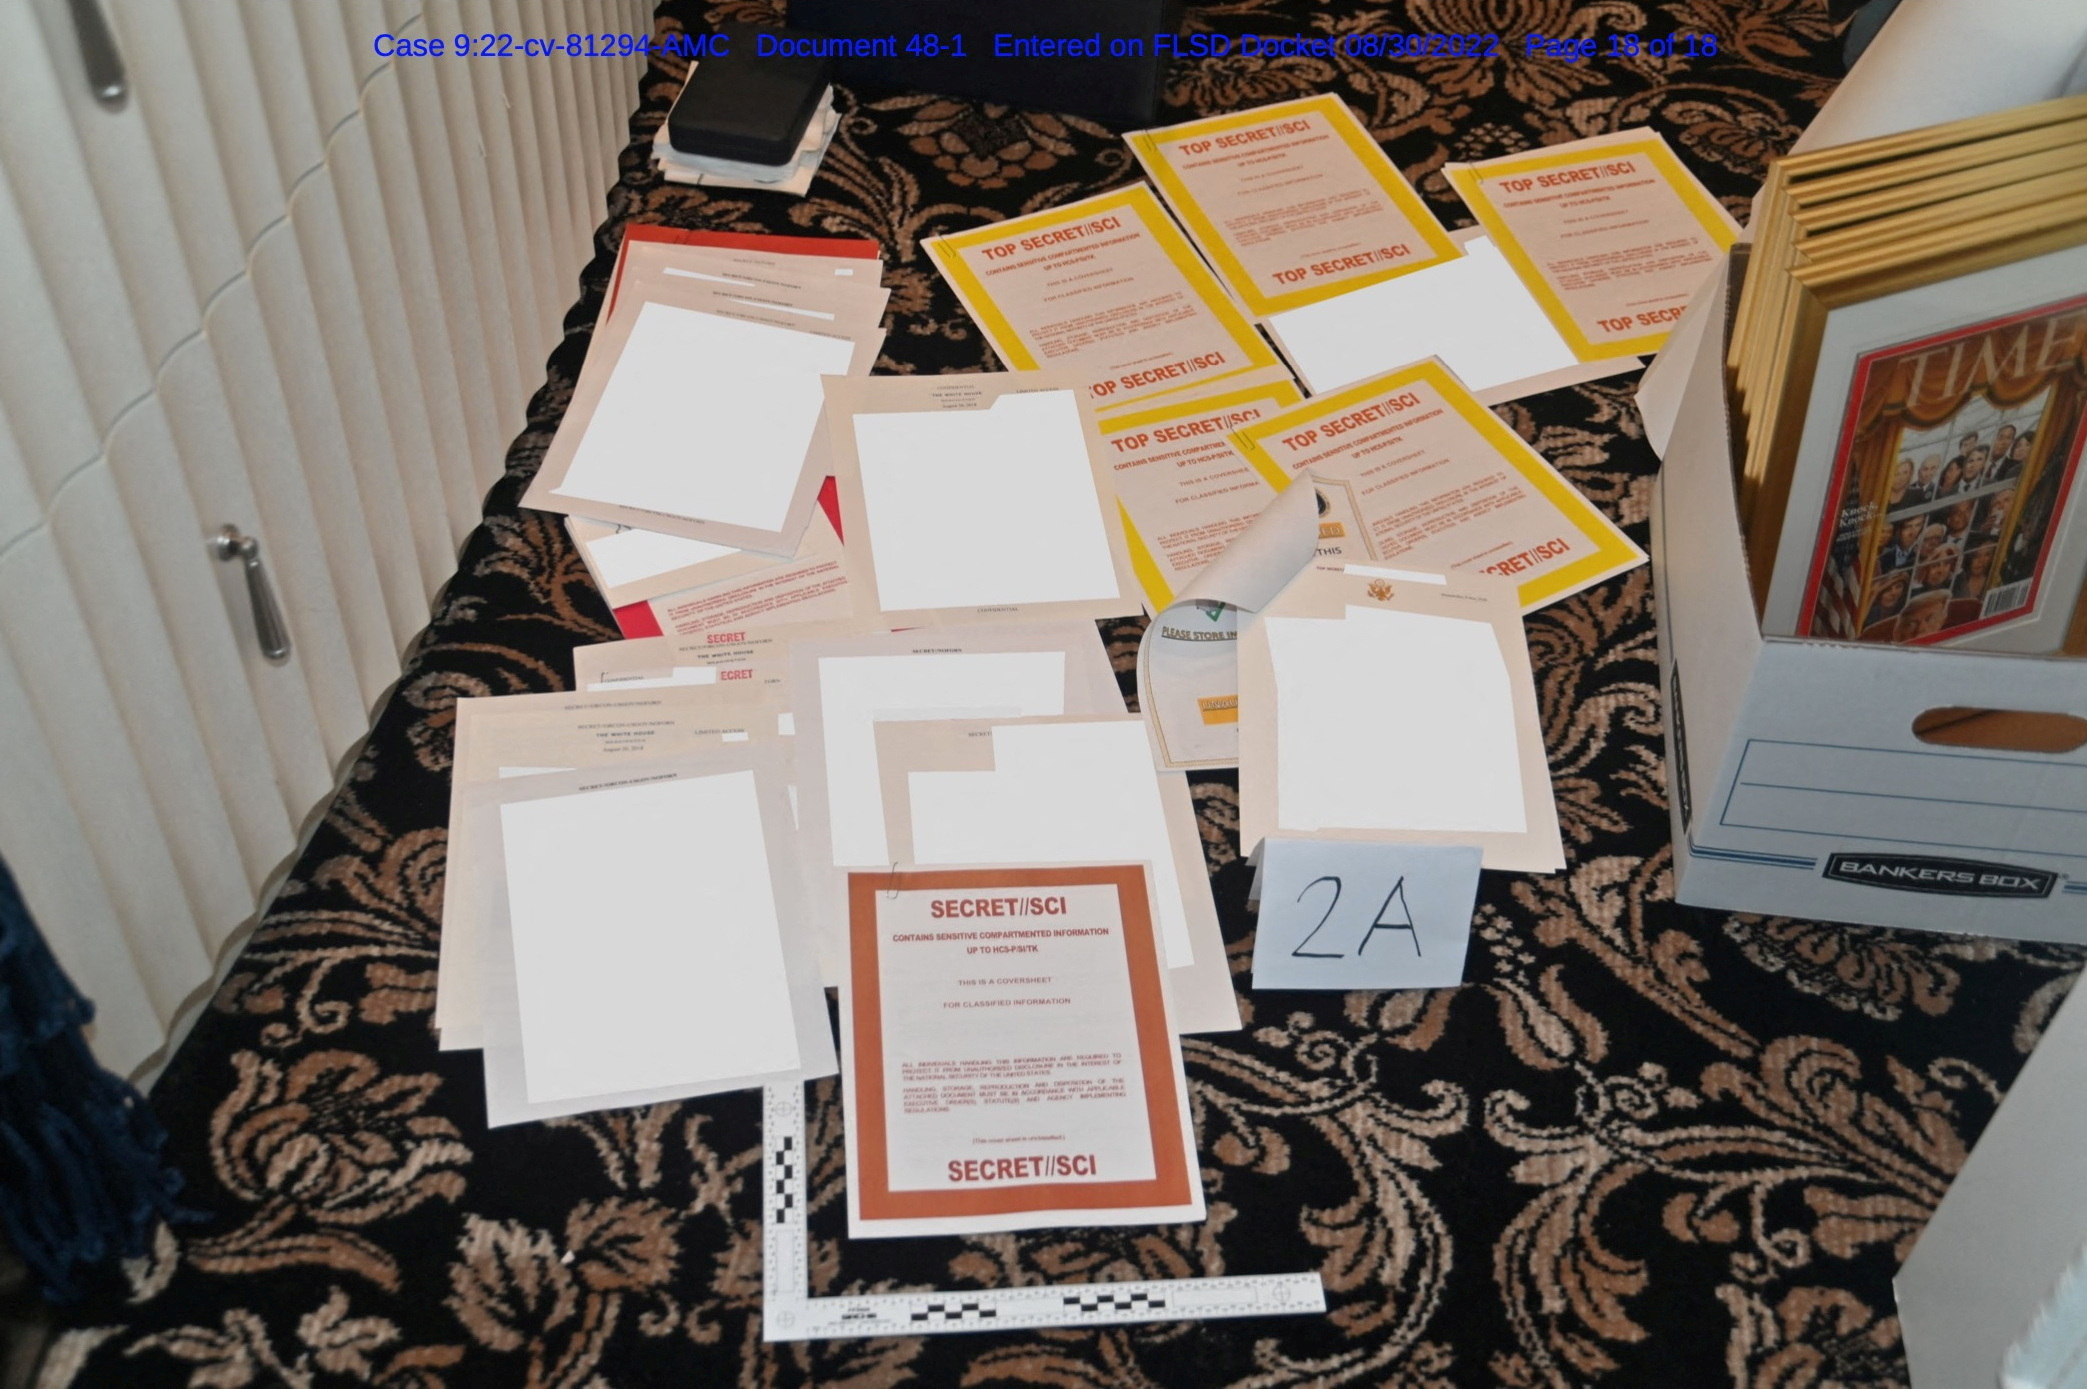 Redacted FBI Photos of Documents and Classified Cover Sheets Recovered from Containers Stored at Former President Donald Trump's Florida Mansion